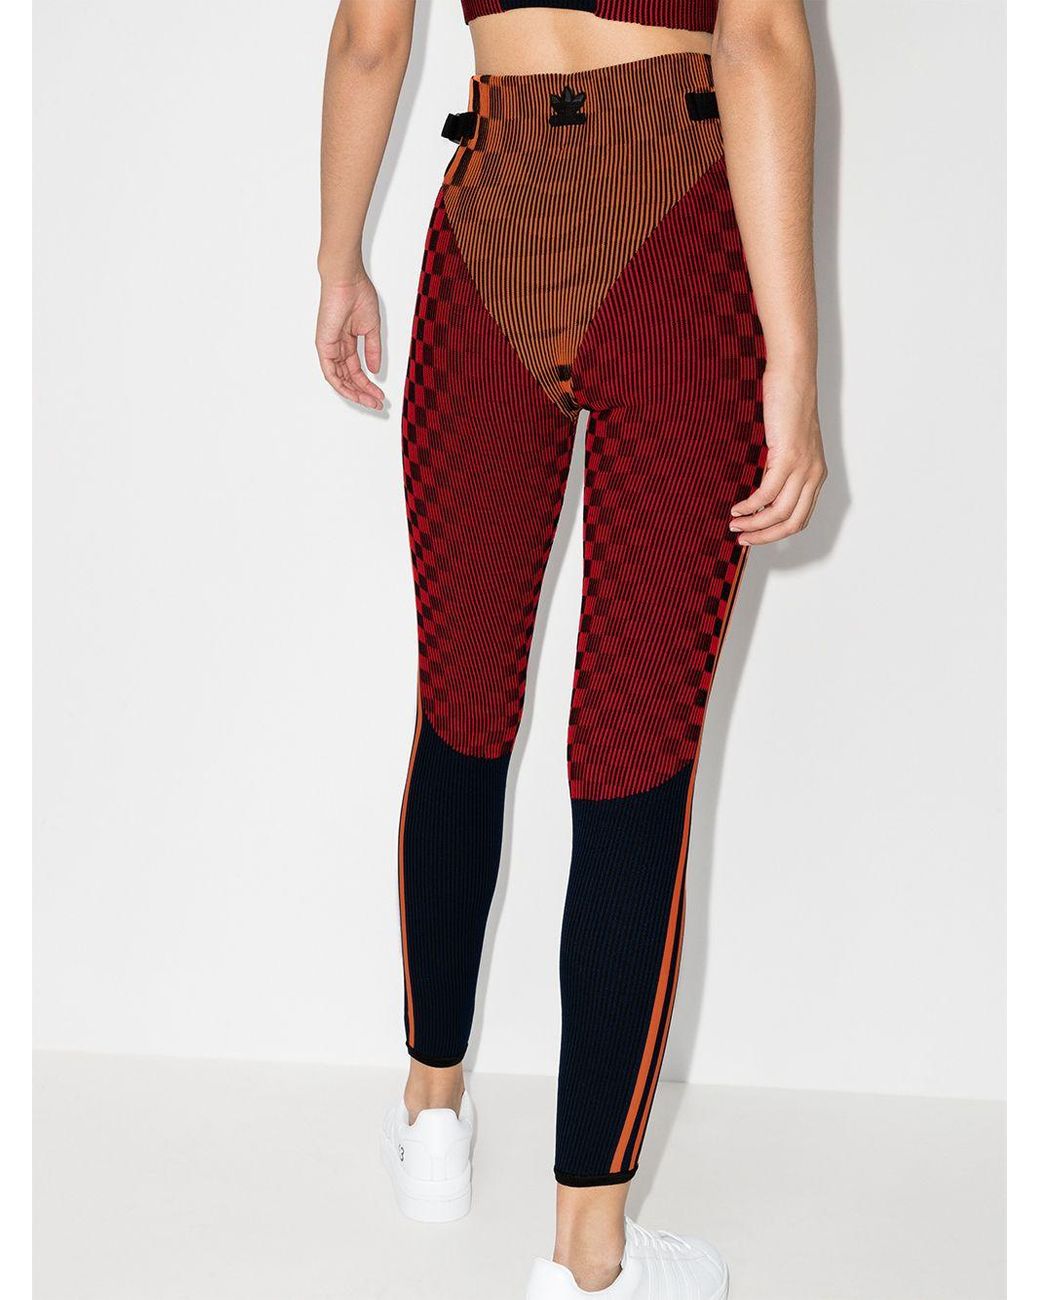 adidas X Paolina Russo Panelled leggings in Orange | Lyst